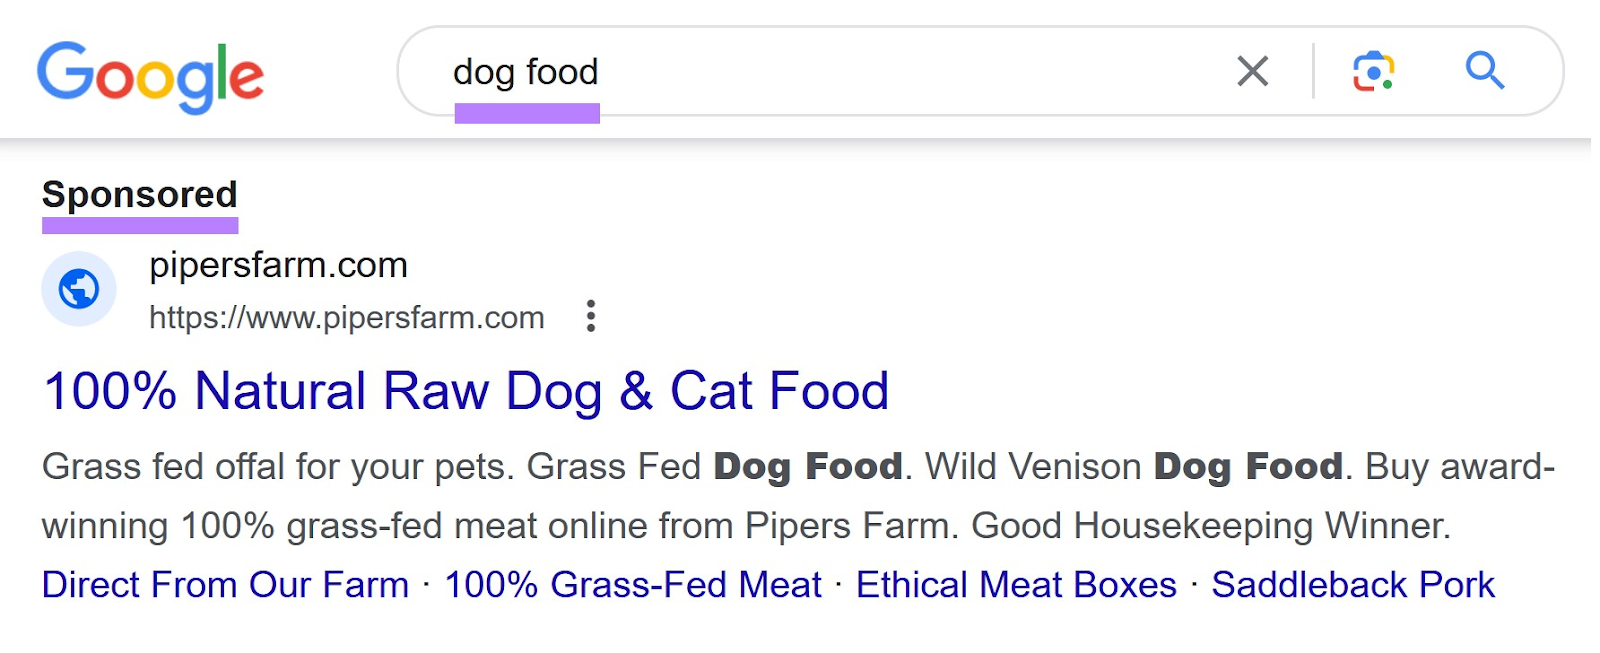 an example of a sponsored post in Google SERP when searching for “dog food”